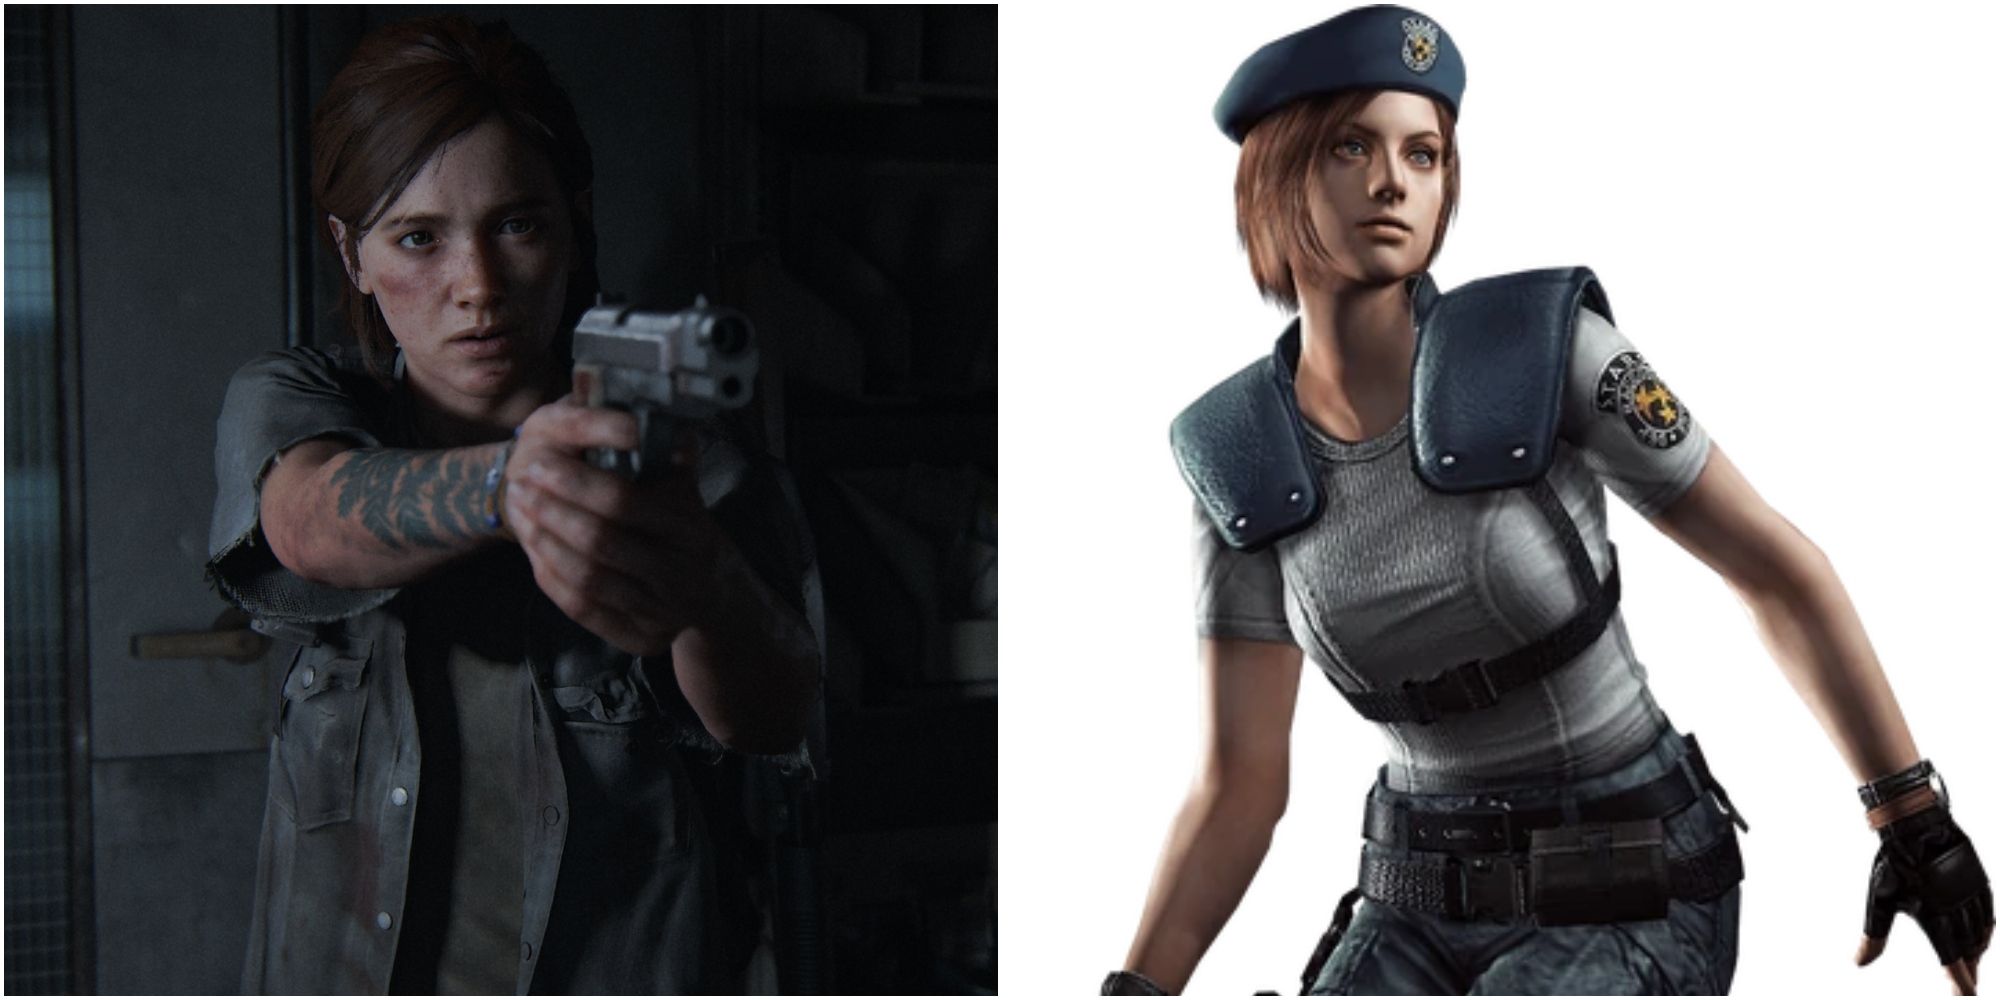 Ellie from the last of us beside Jill Valentine from resident evil